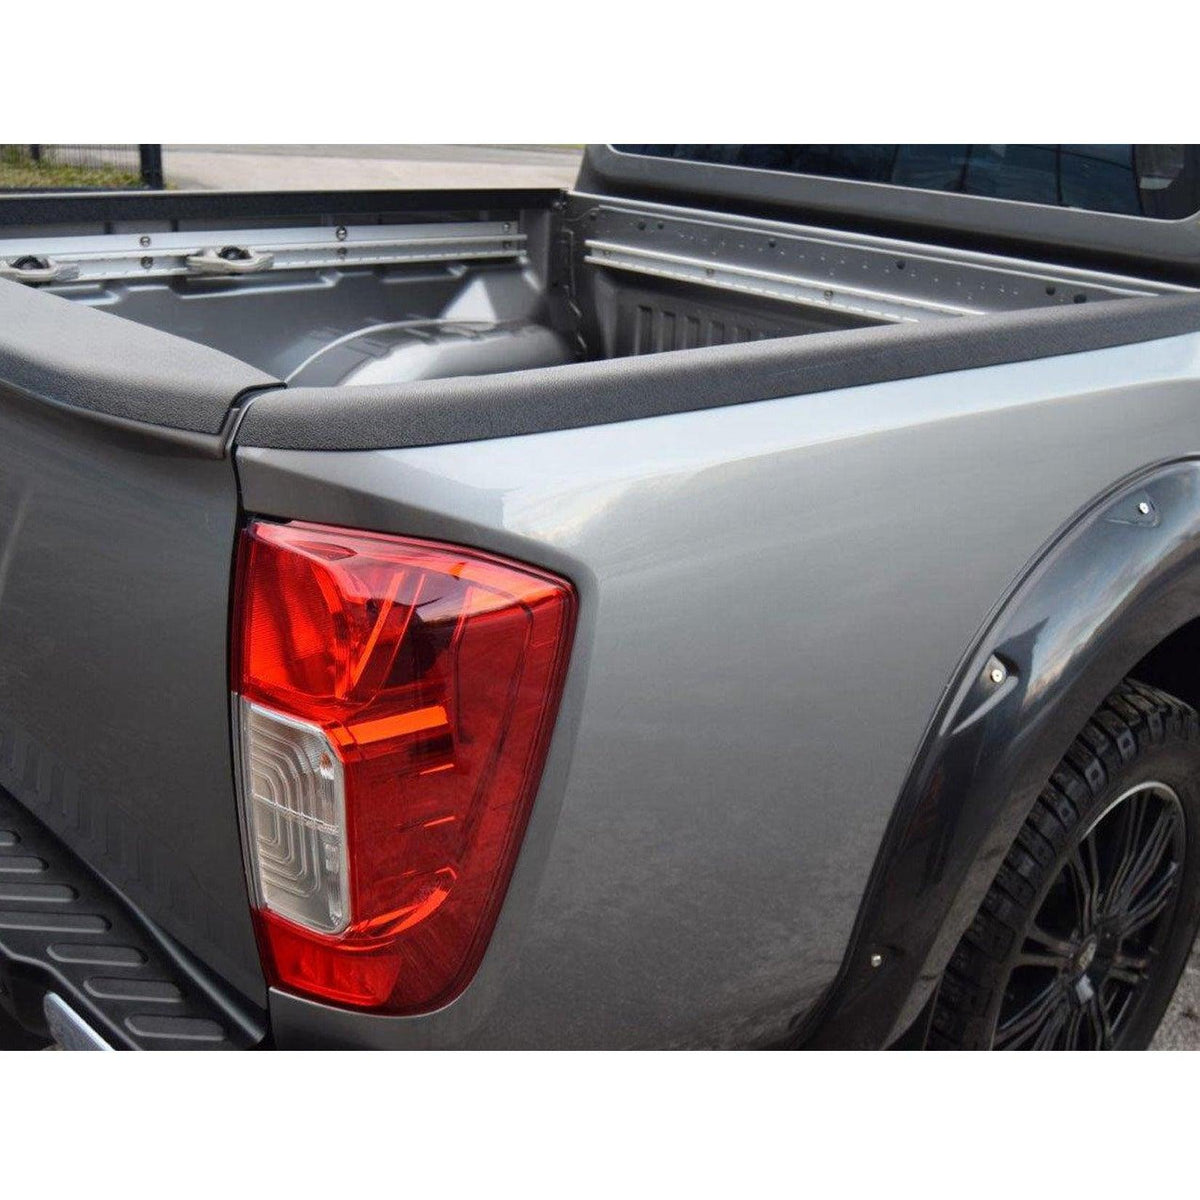 NISSAN NAVARA NP300 2016 ON - DOUBLE CAB LOAD BED RAIL CAPS - Storm Xccessories2